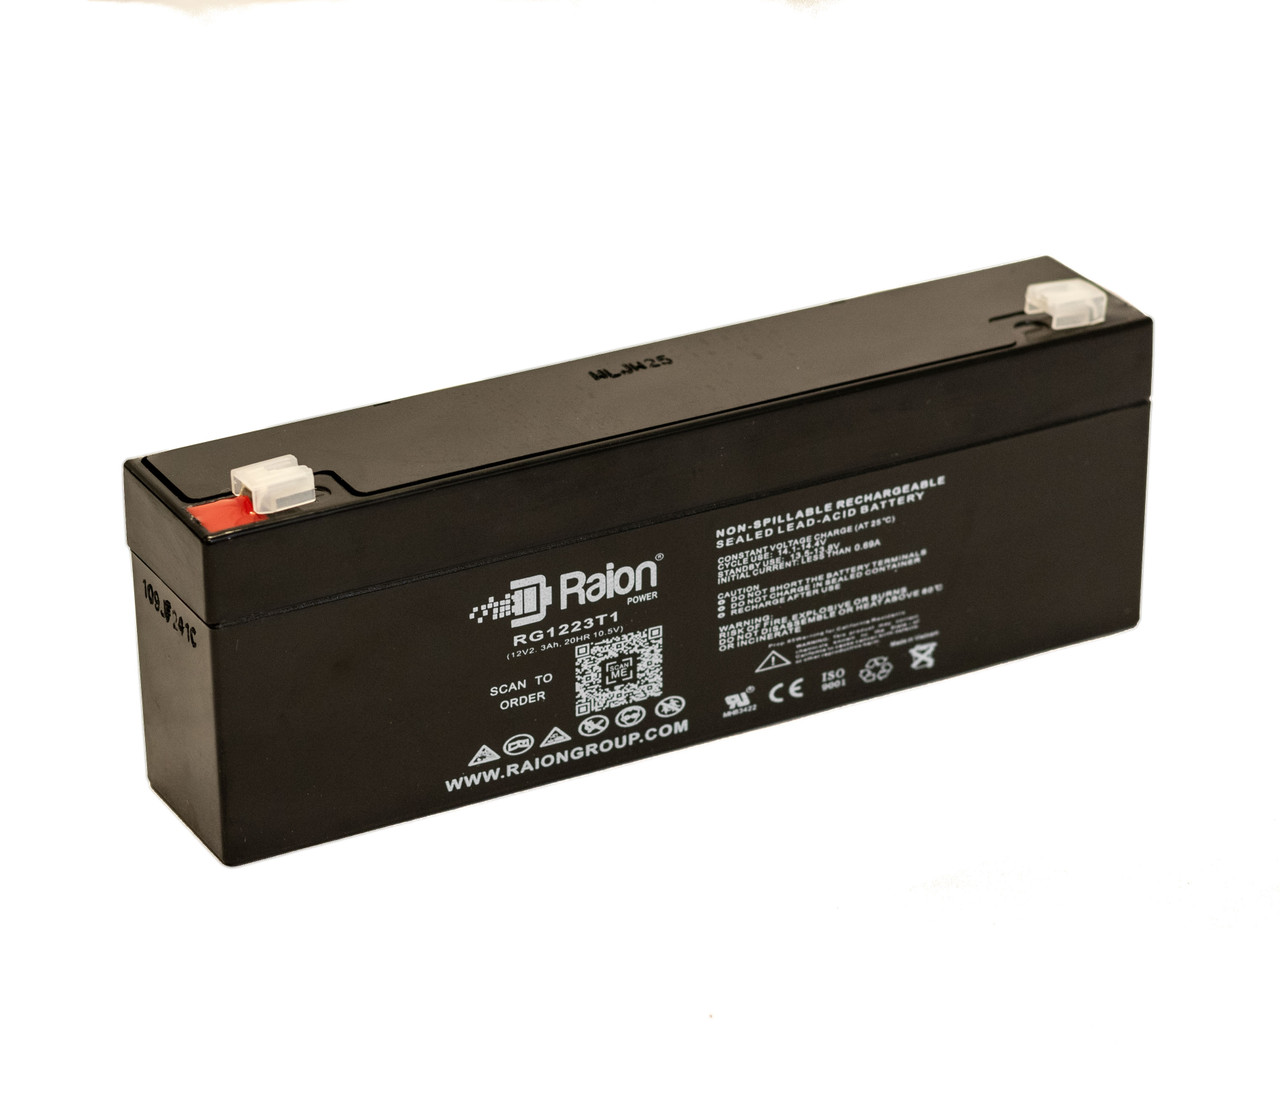 Raion Power RG1223T1 Replacement Battery for Double Tech DB12-2